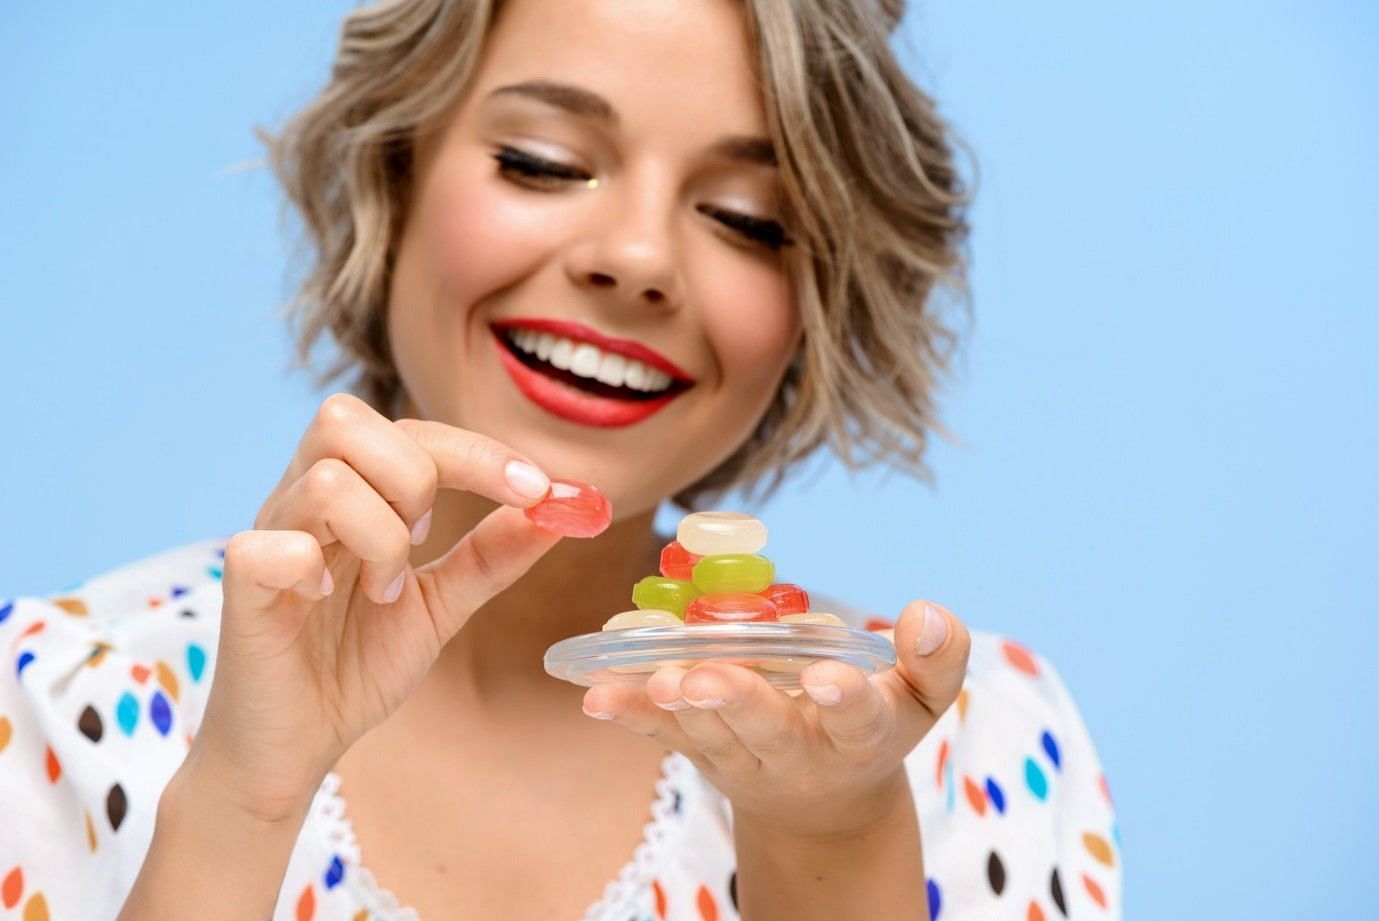 Majority of consumers of Ayds Diet Candy were women, who were appealed by the thought of getting a slim body (Image by Cookie_studio on Freepik)